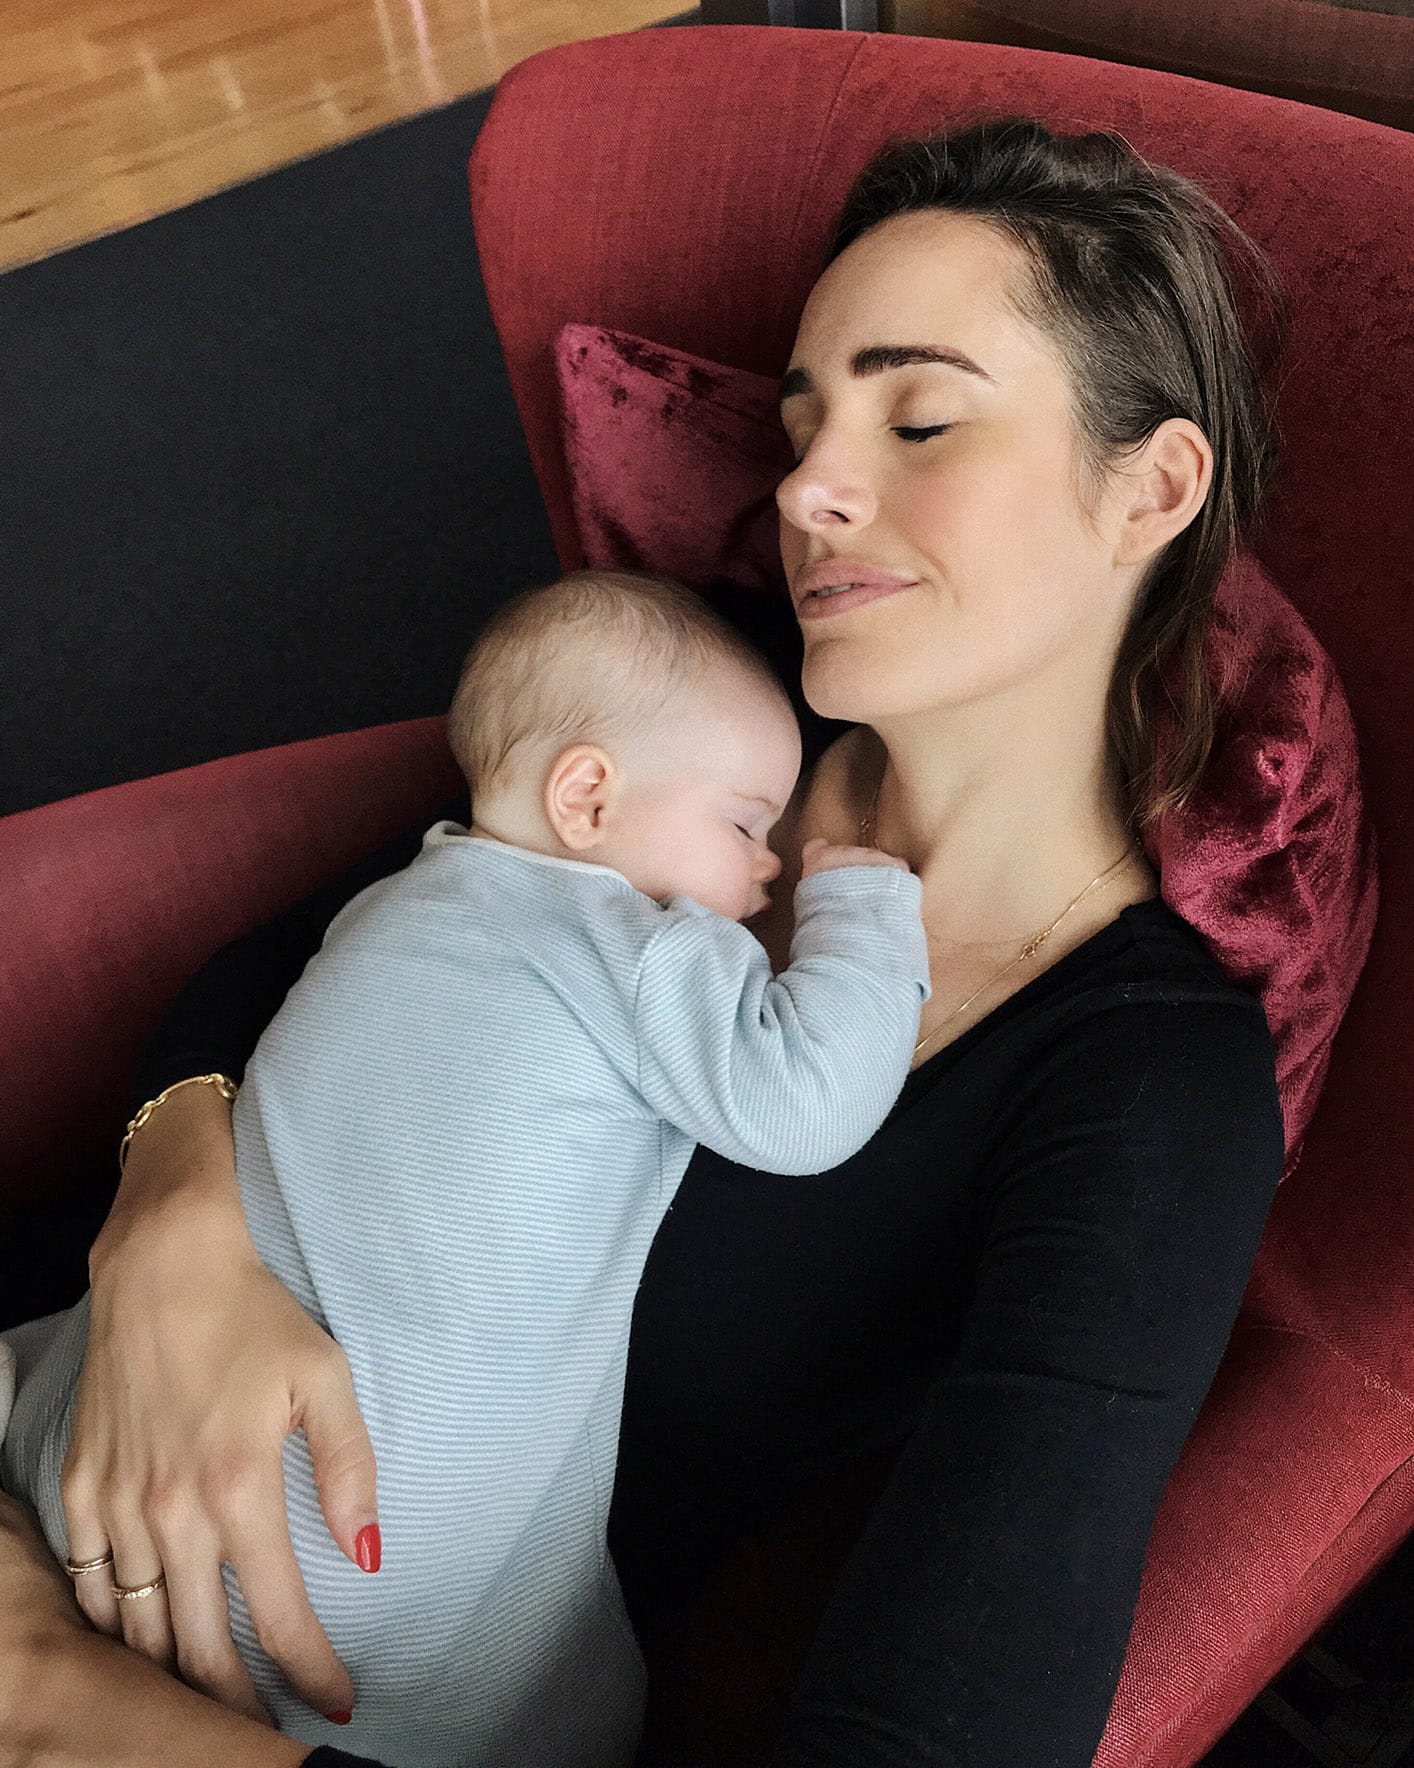 Louise Roe thoughts and advice on maternity leave and motherhood